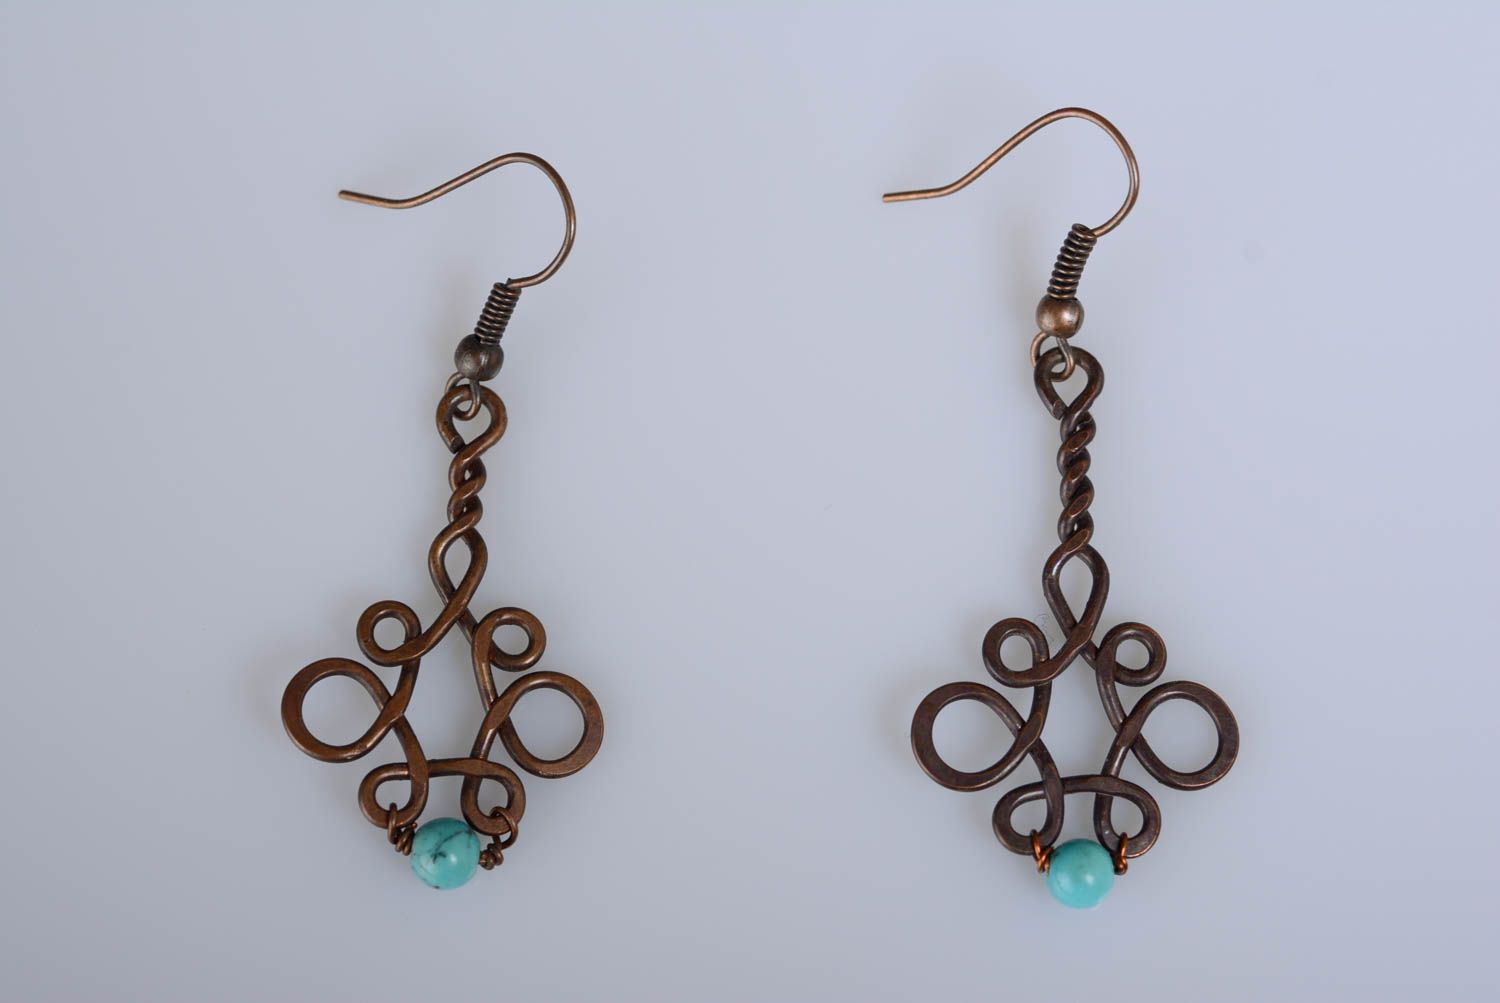 Big earrings made of copper using wire wrap technique with artificial turquoise photo 4